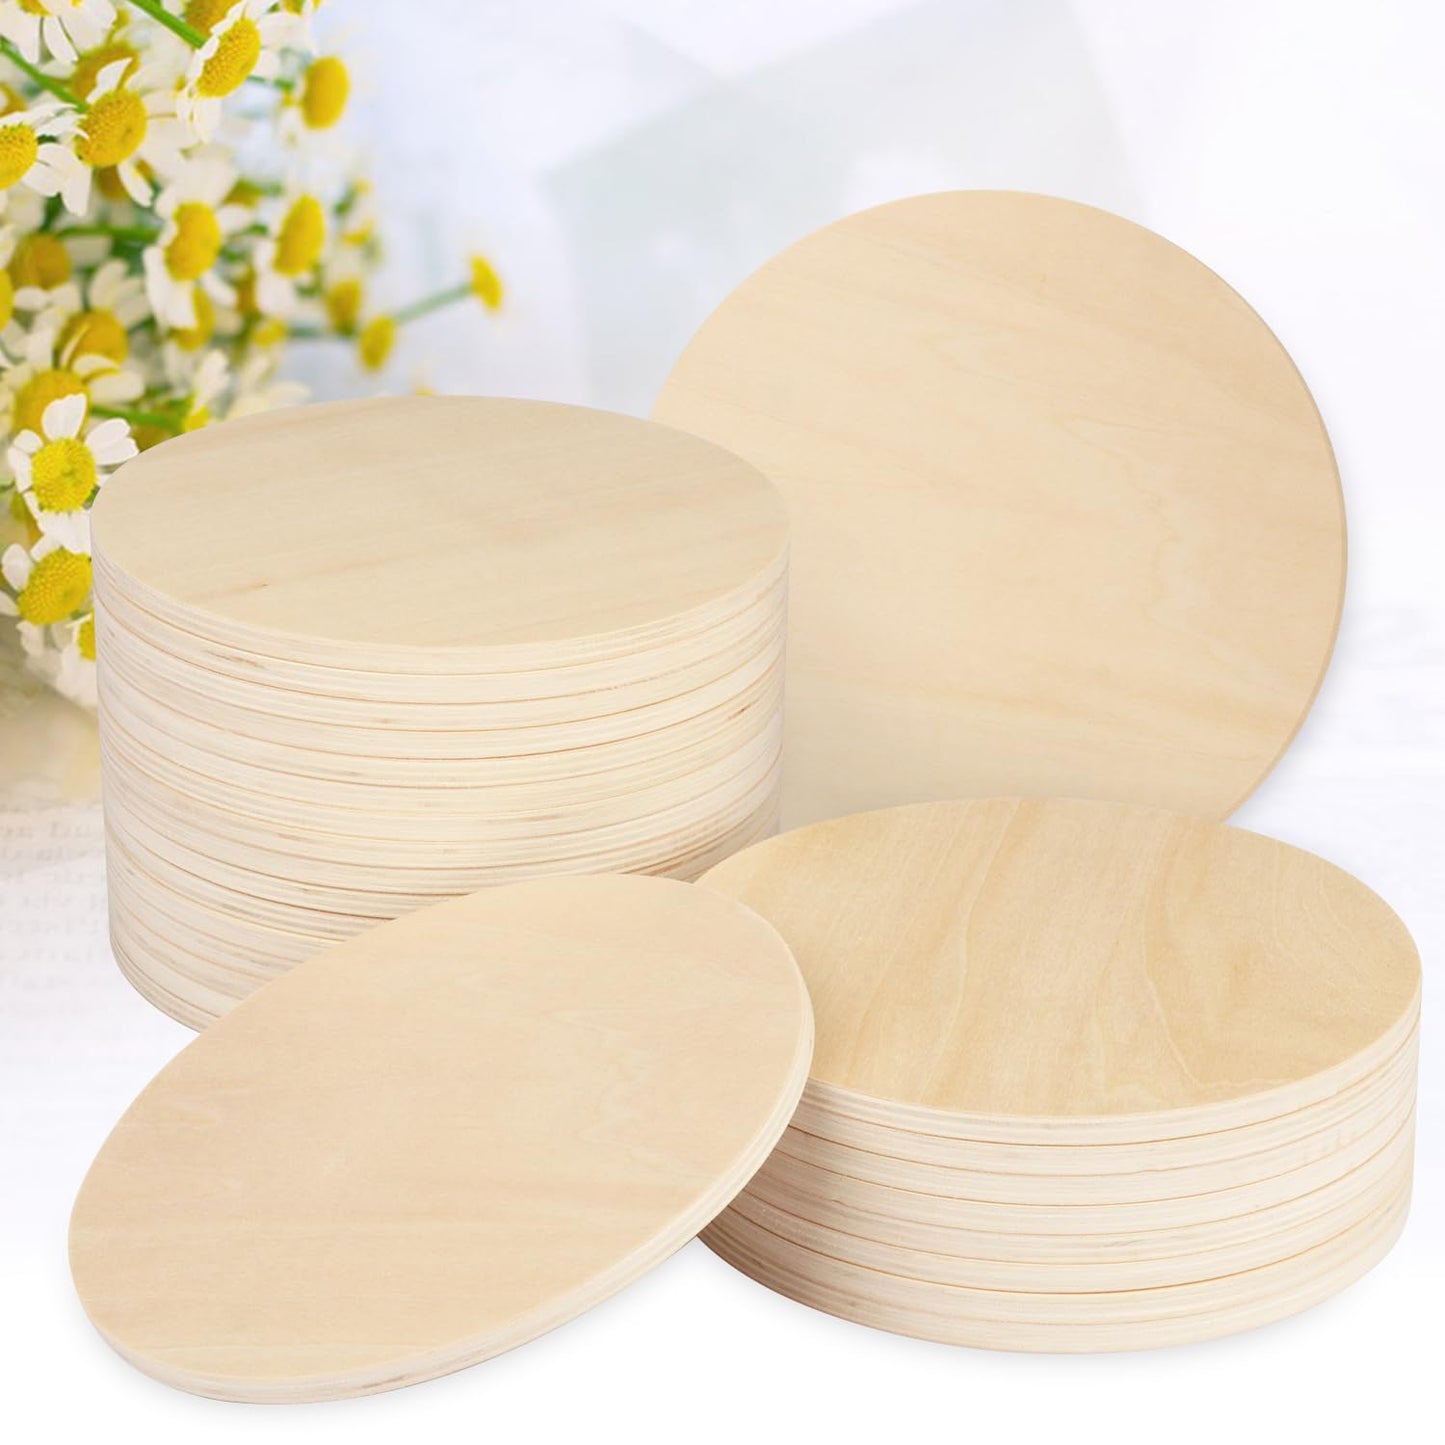 50 PCS 4 Inch Unfinished Wood Circles, Thickness 6 mm, Wooden Rounds for Crafts, Wood Discs for DIY Painting Decorations, Weddings and Parties,by